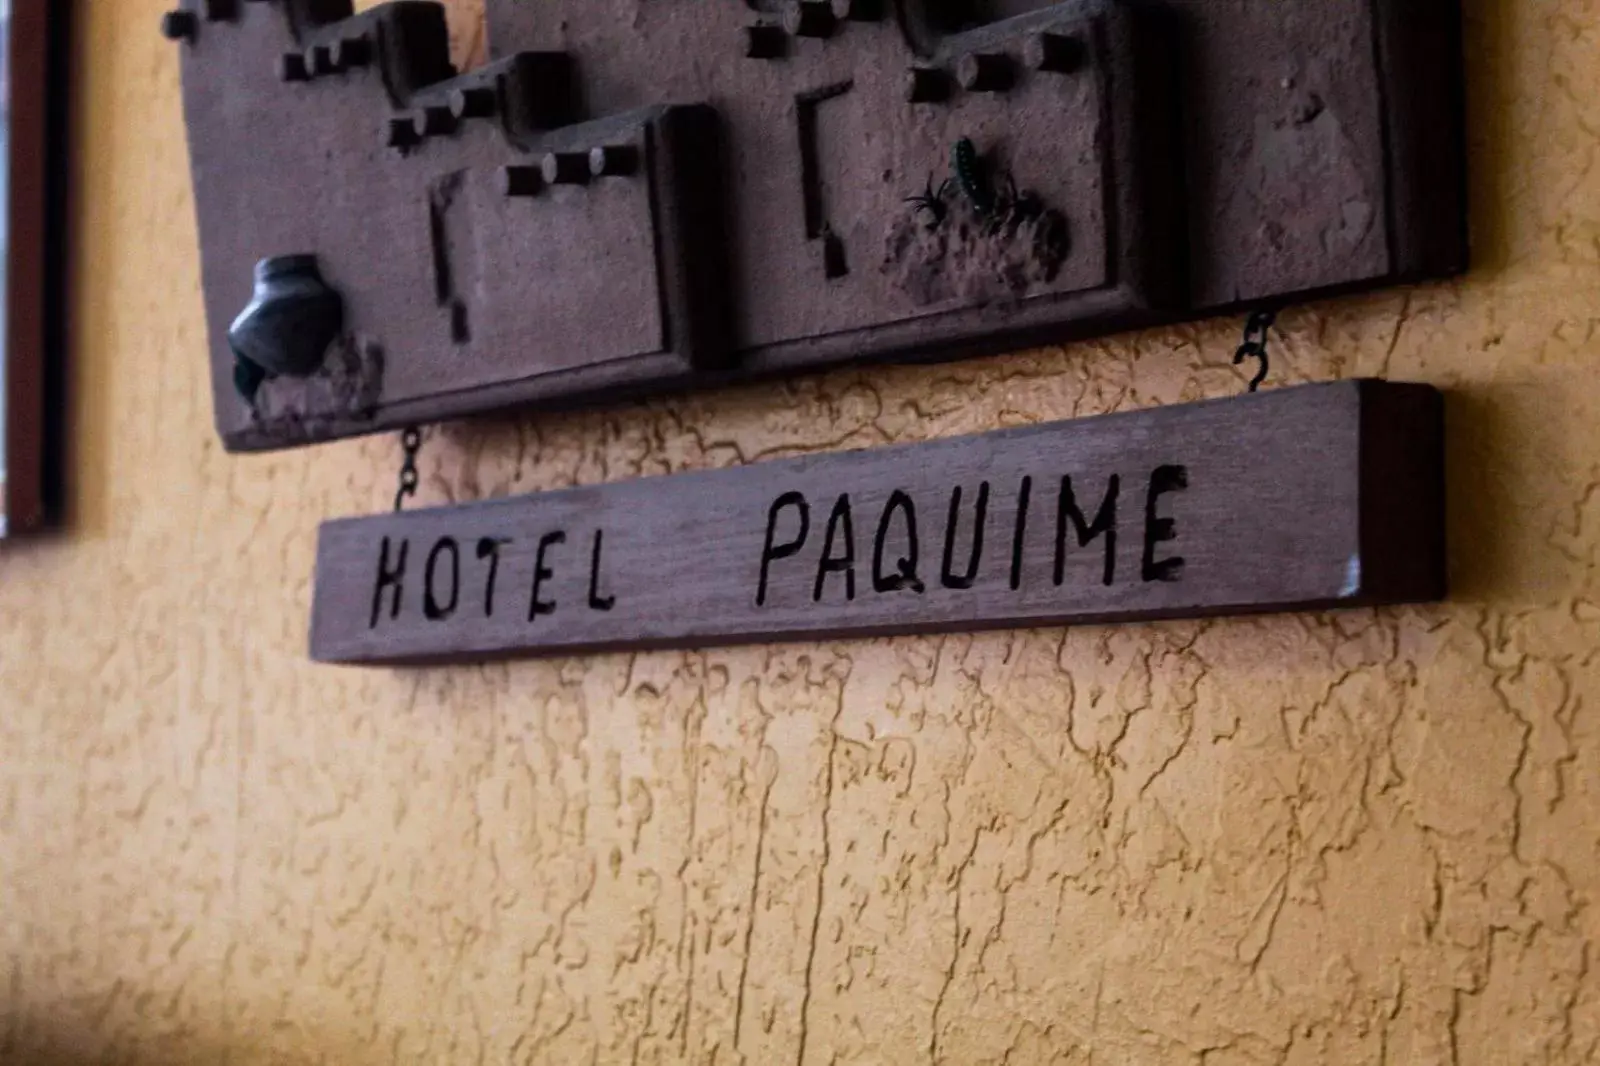 On site in Hotel Paquime